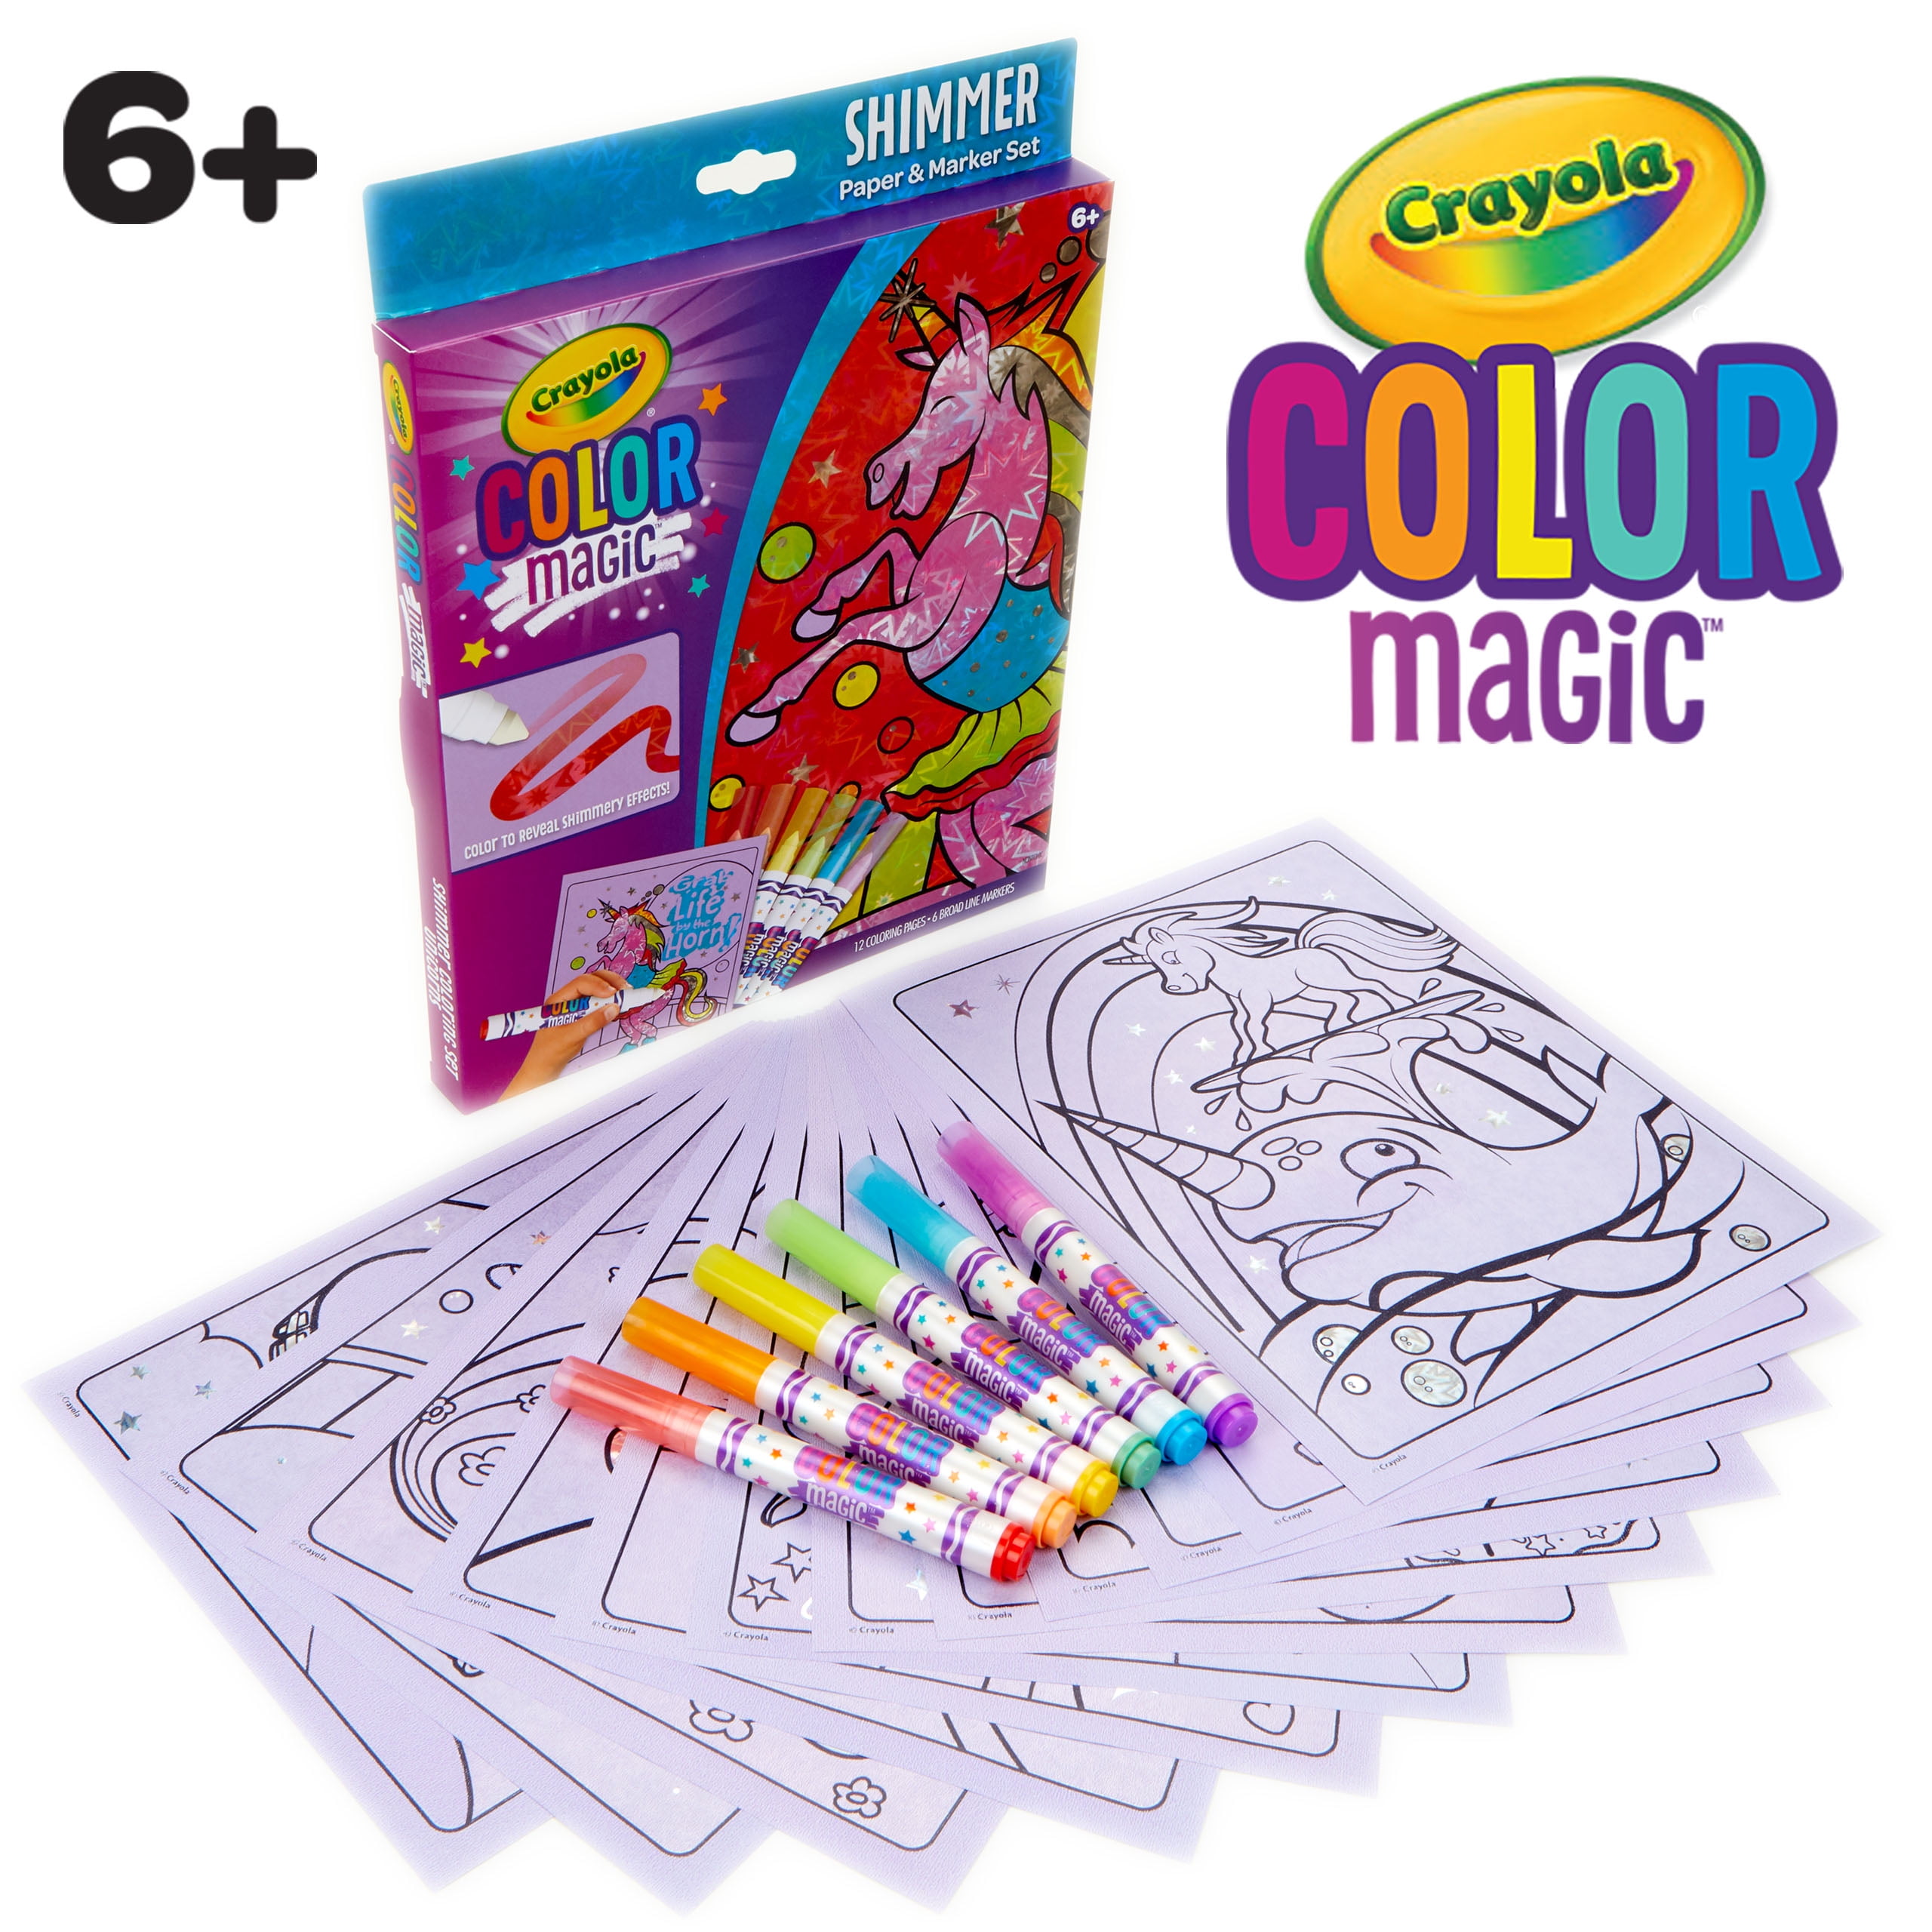 Crayola Color Magic Unicorn Shimmer Paper and Marker Coloring Set, 12 Pages, Child, Unisex